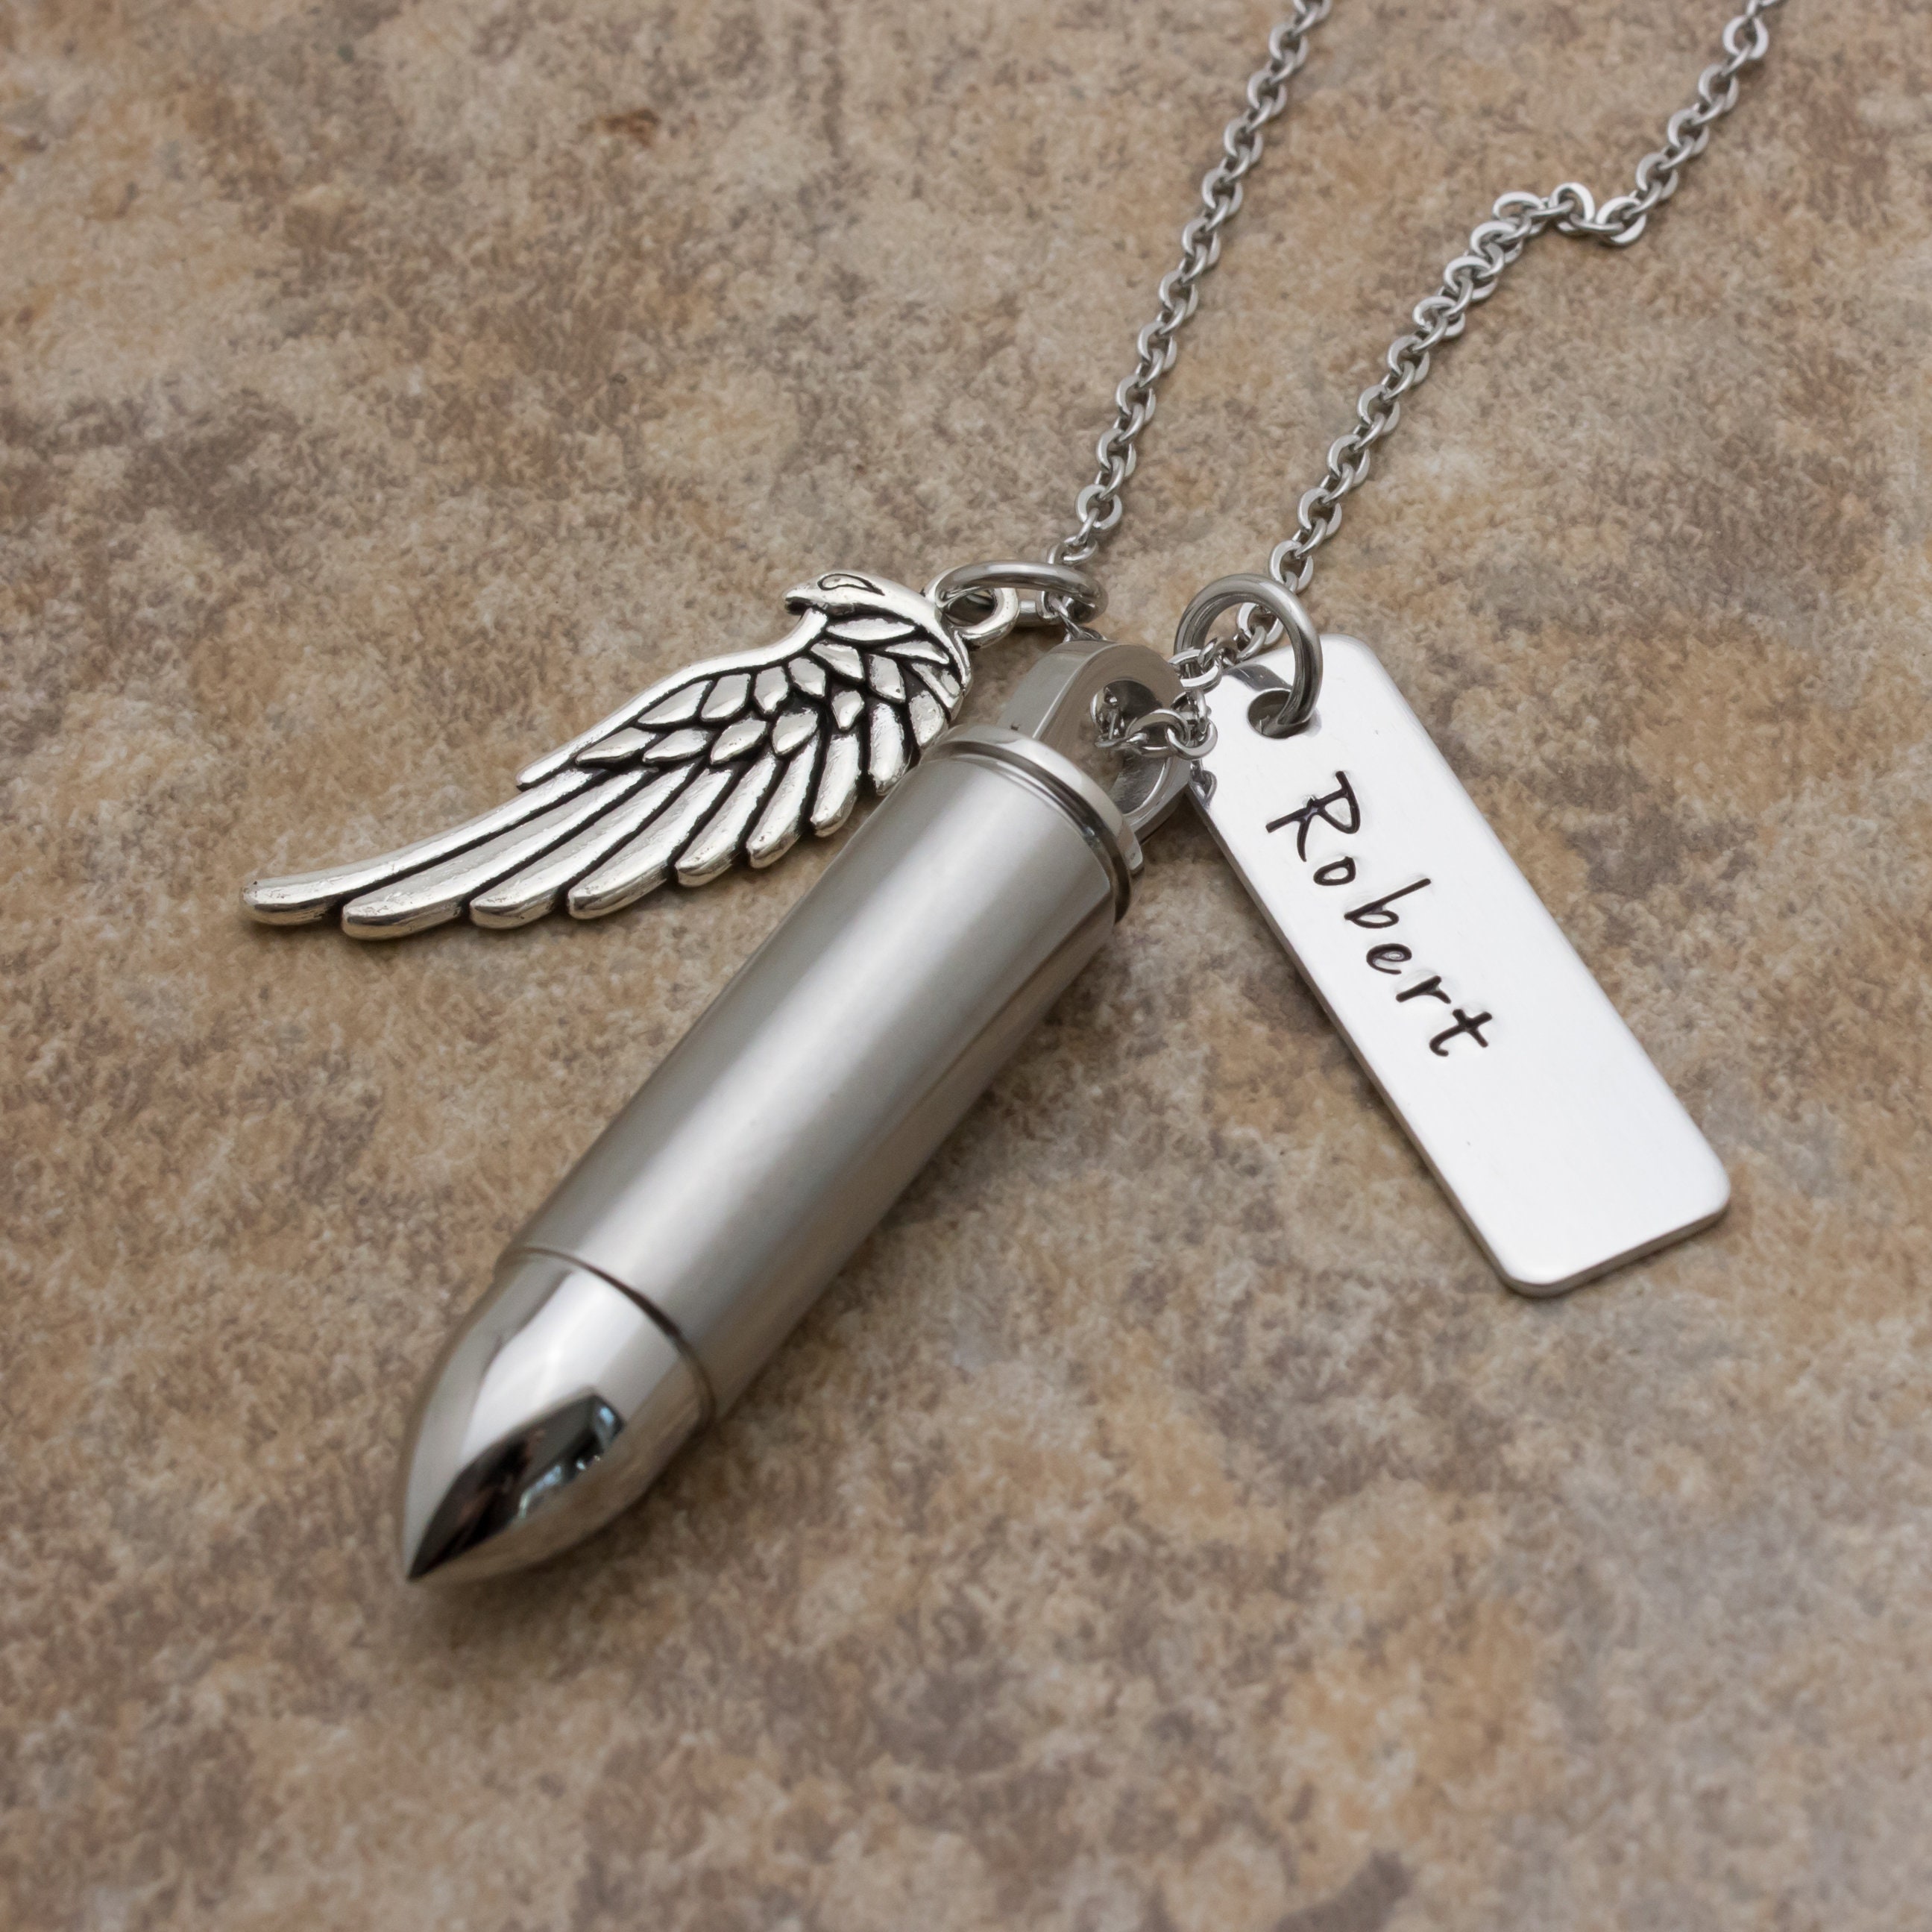 Bullet Urn Necklace Cremation Jewelry Men's Necklace